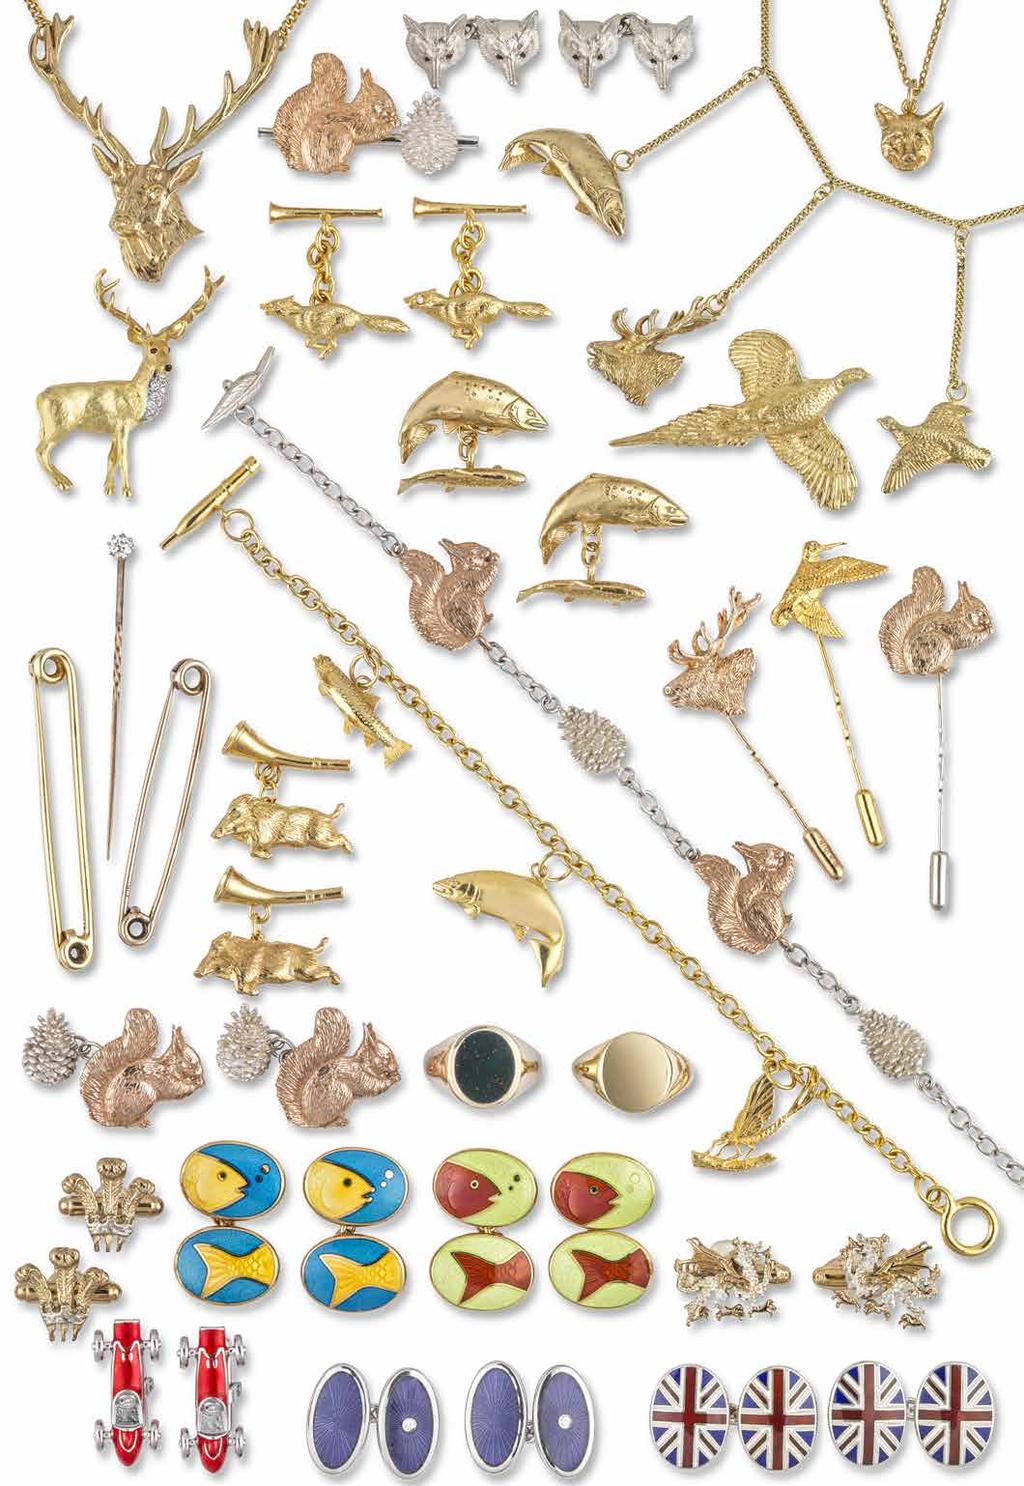 Nos 132 159 GREAT BRITISH WILDLIFE & GENTS COLLECTIONS JEWELLERY SHOWN ACTUAL SIZE 133 132 135 136 134 137 138 140 139